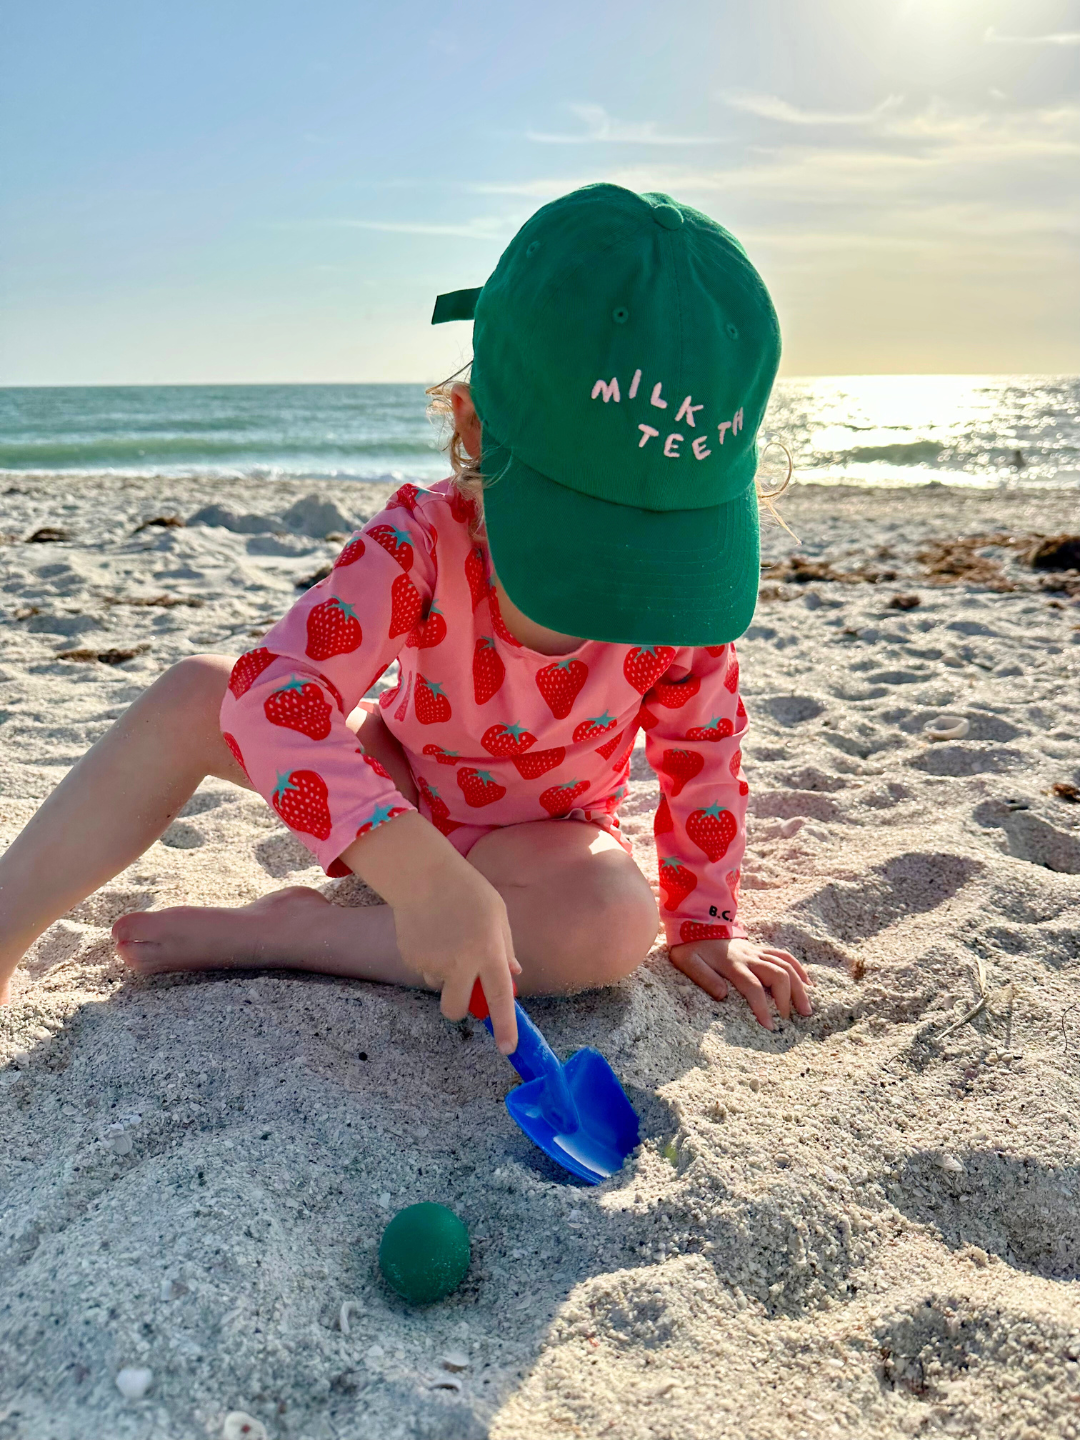 Kelly Green | Toddler wearing the Milk Teeth baseball cap in kelly green with pink Milk Teeth embroidery, at the beach in a pink swimsuit with red strawberries.